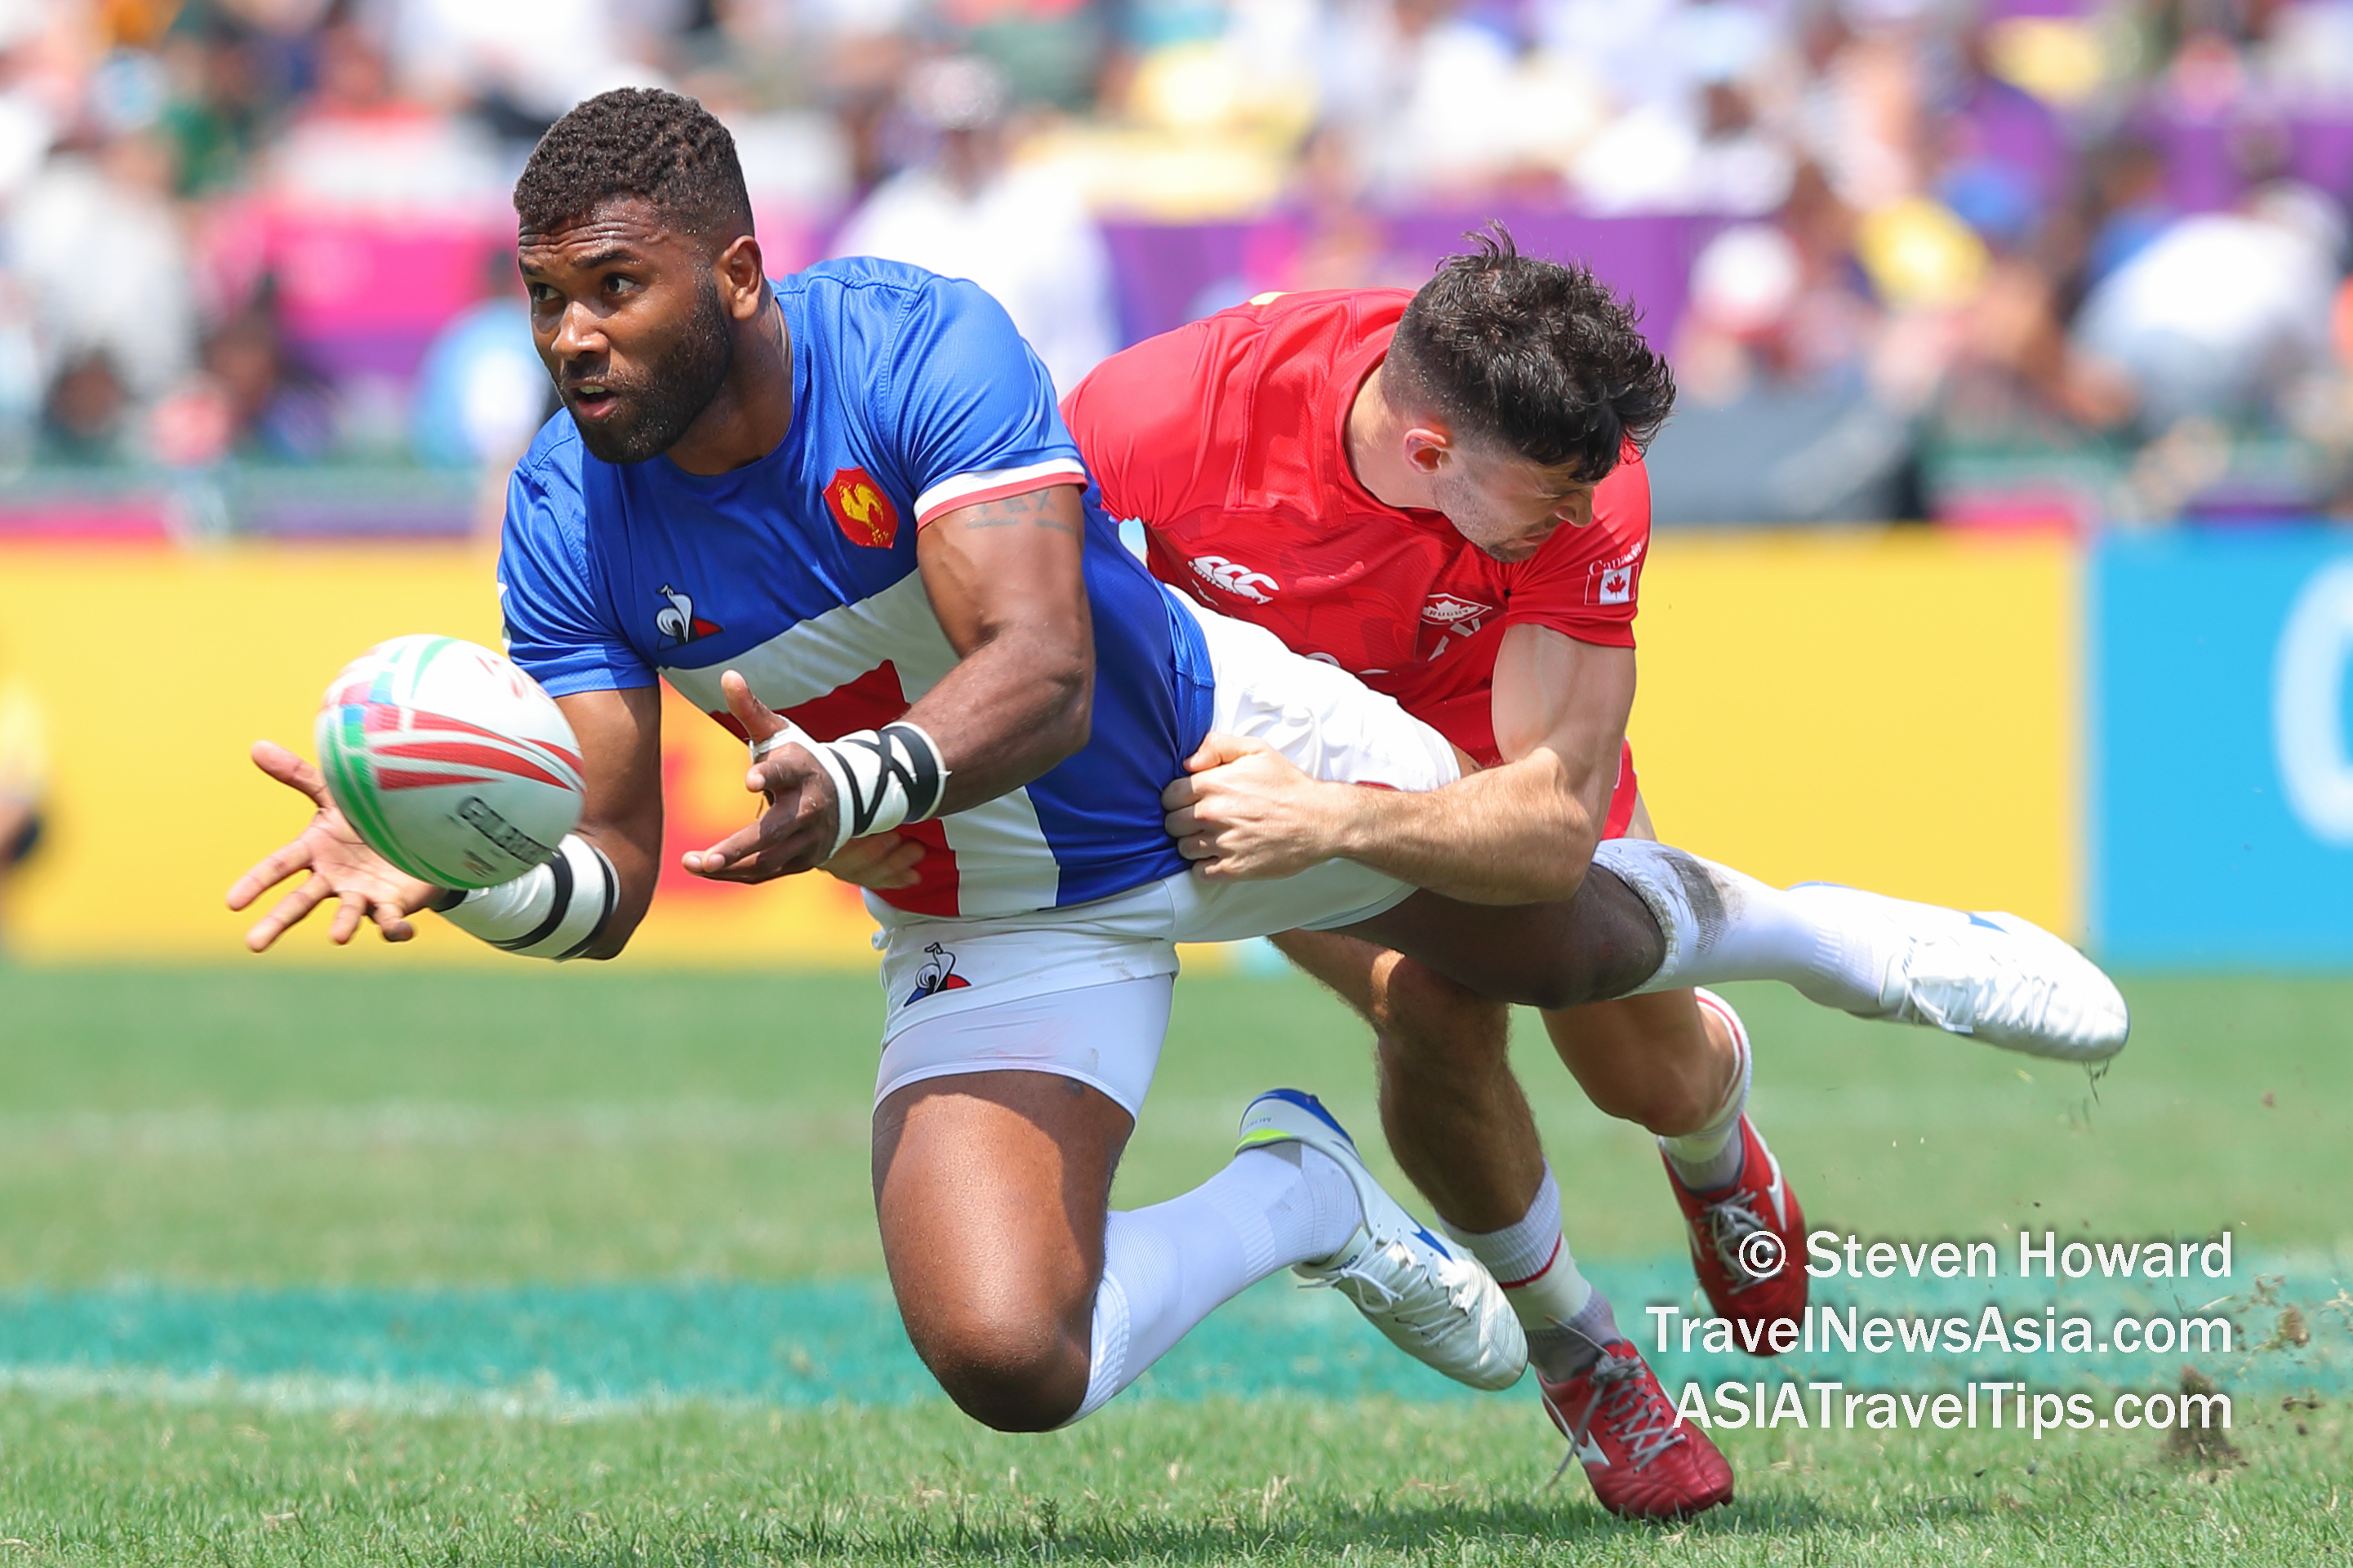 France in action against Canada in the 2019 Cathay Pacific / HSBC Hong Kong Sevens. Picture by Steven Howard of TravelNewsAsia.com Click to enlarge.